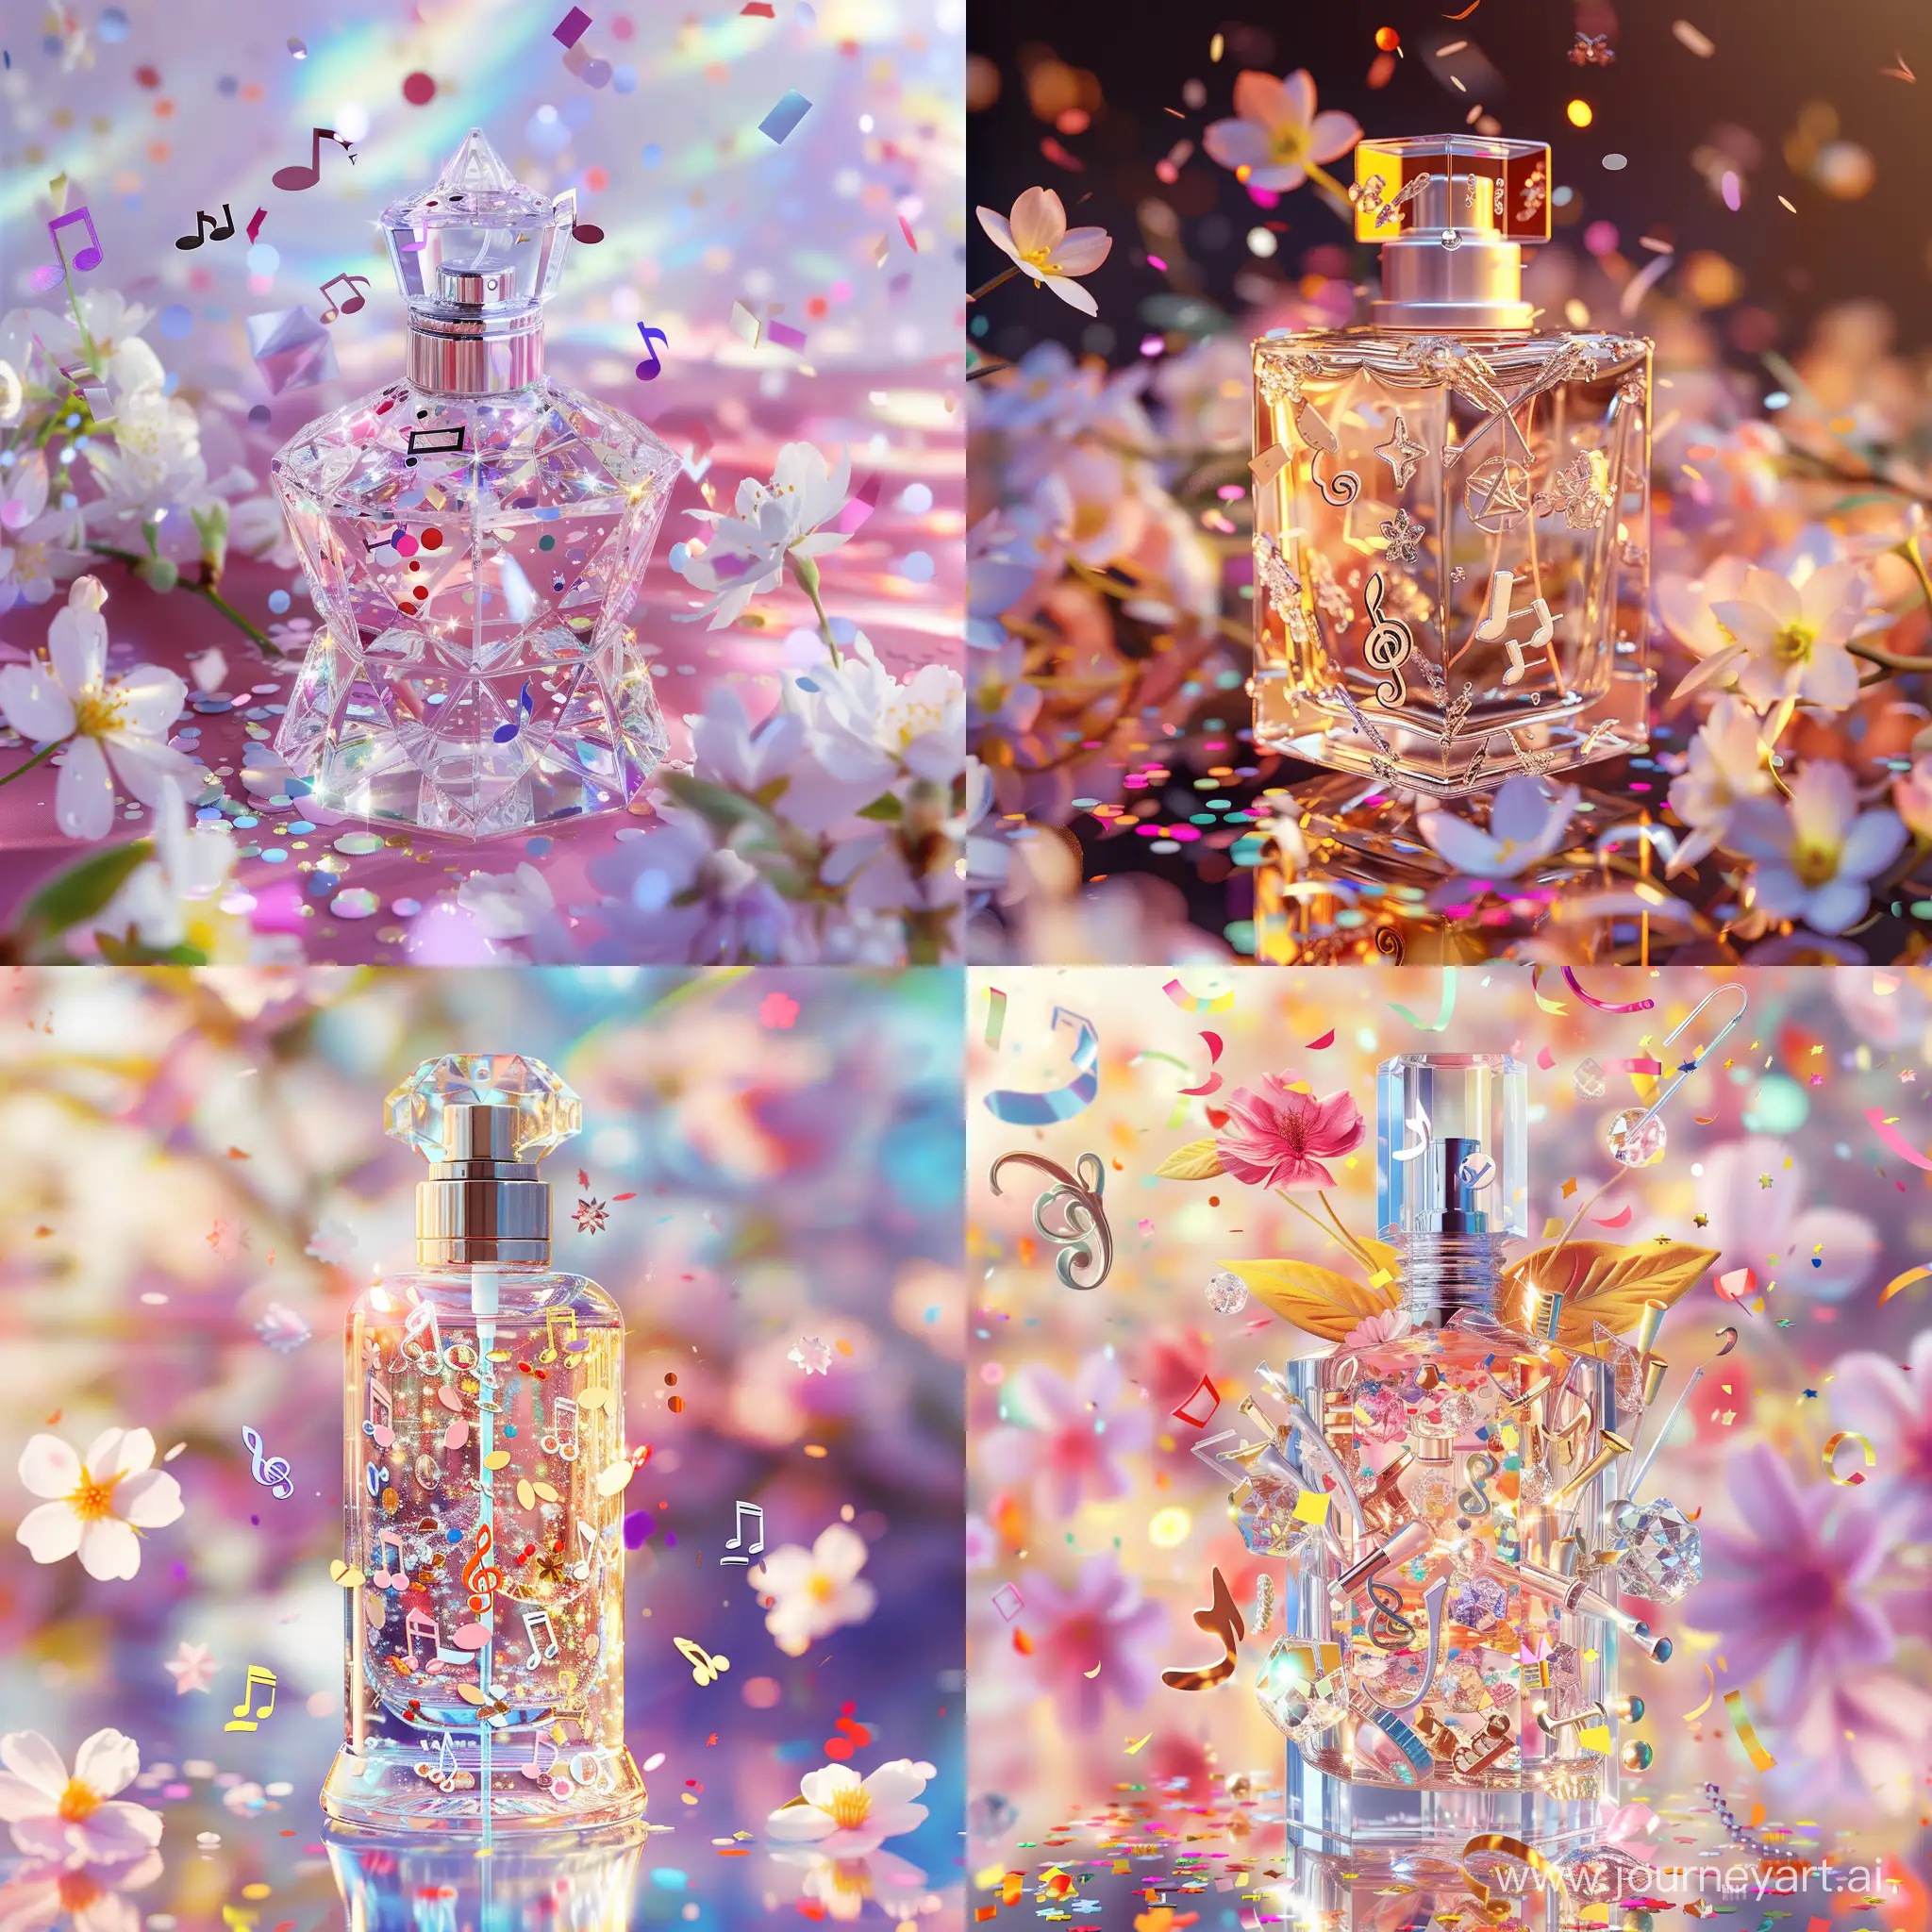 Crystal-Perfume-Bottle-with-Musical-Notes-and-Spring-Flowers-in-Stunning-8K-Ultra-HD